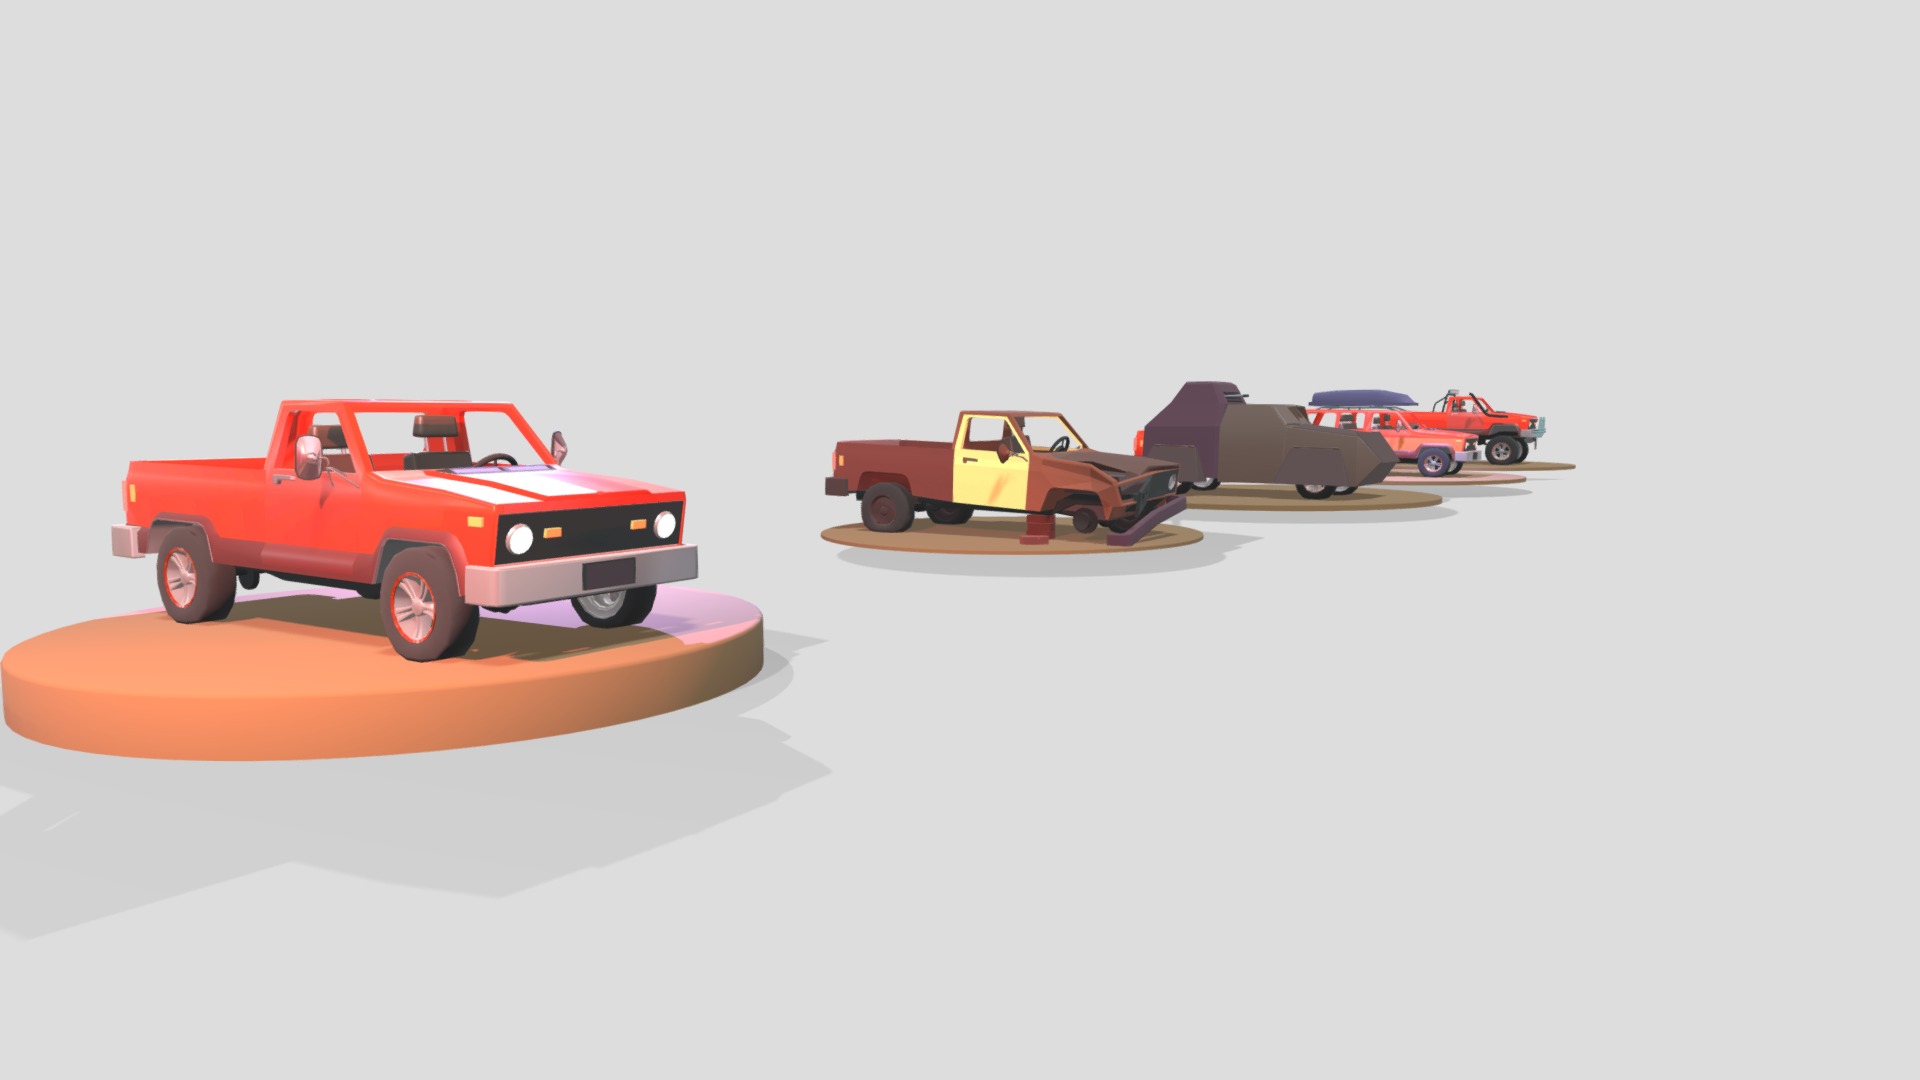 3D model 5 Versions Of A Car - This is a 3D model of the 5 Versions Of A Car. The 3D model is about a group of toy cars.